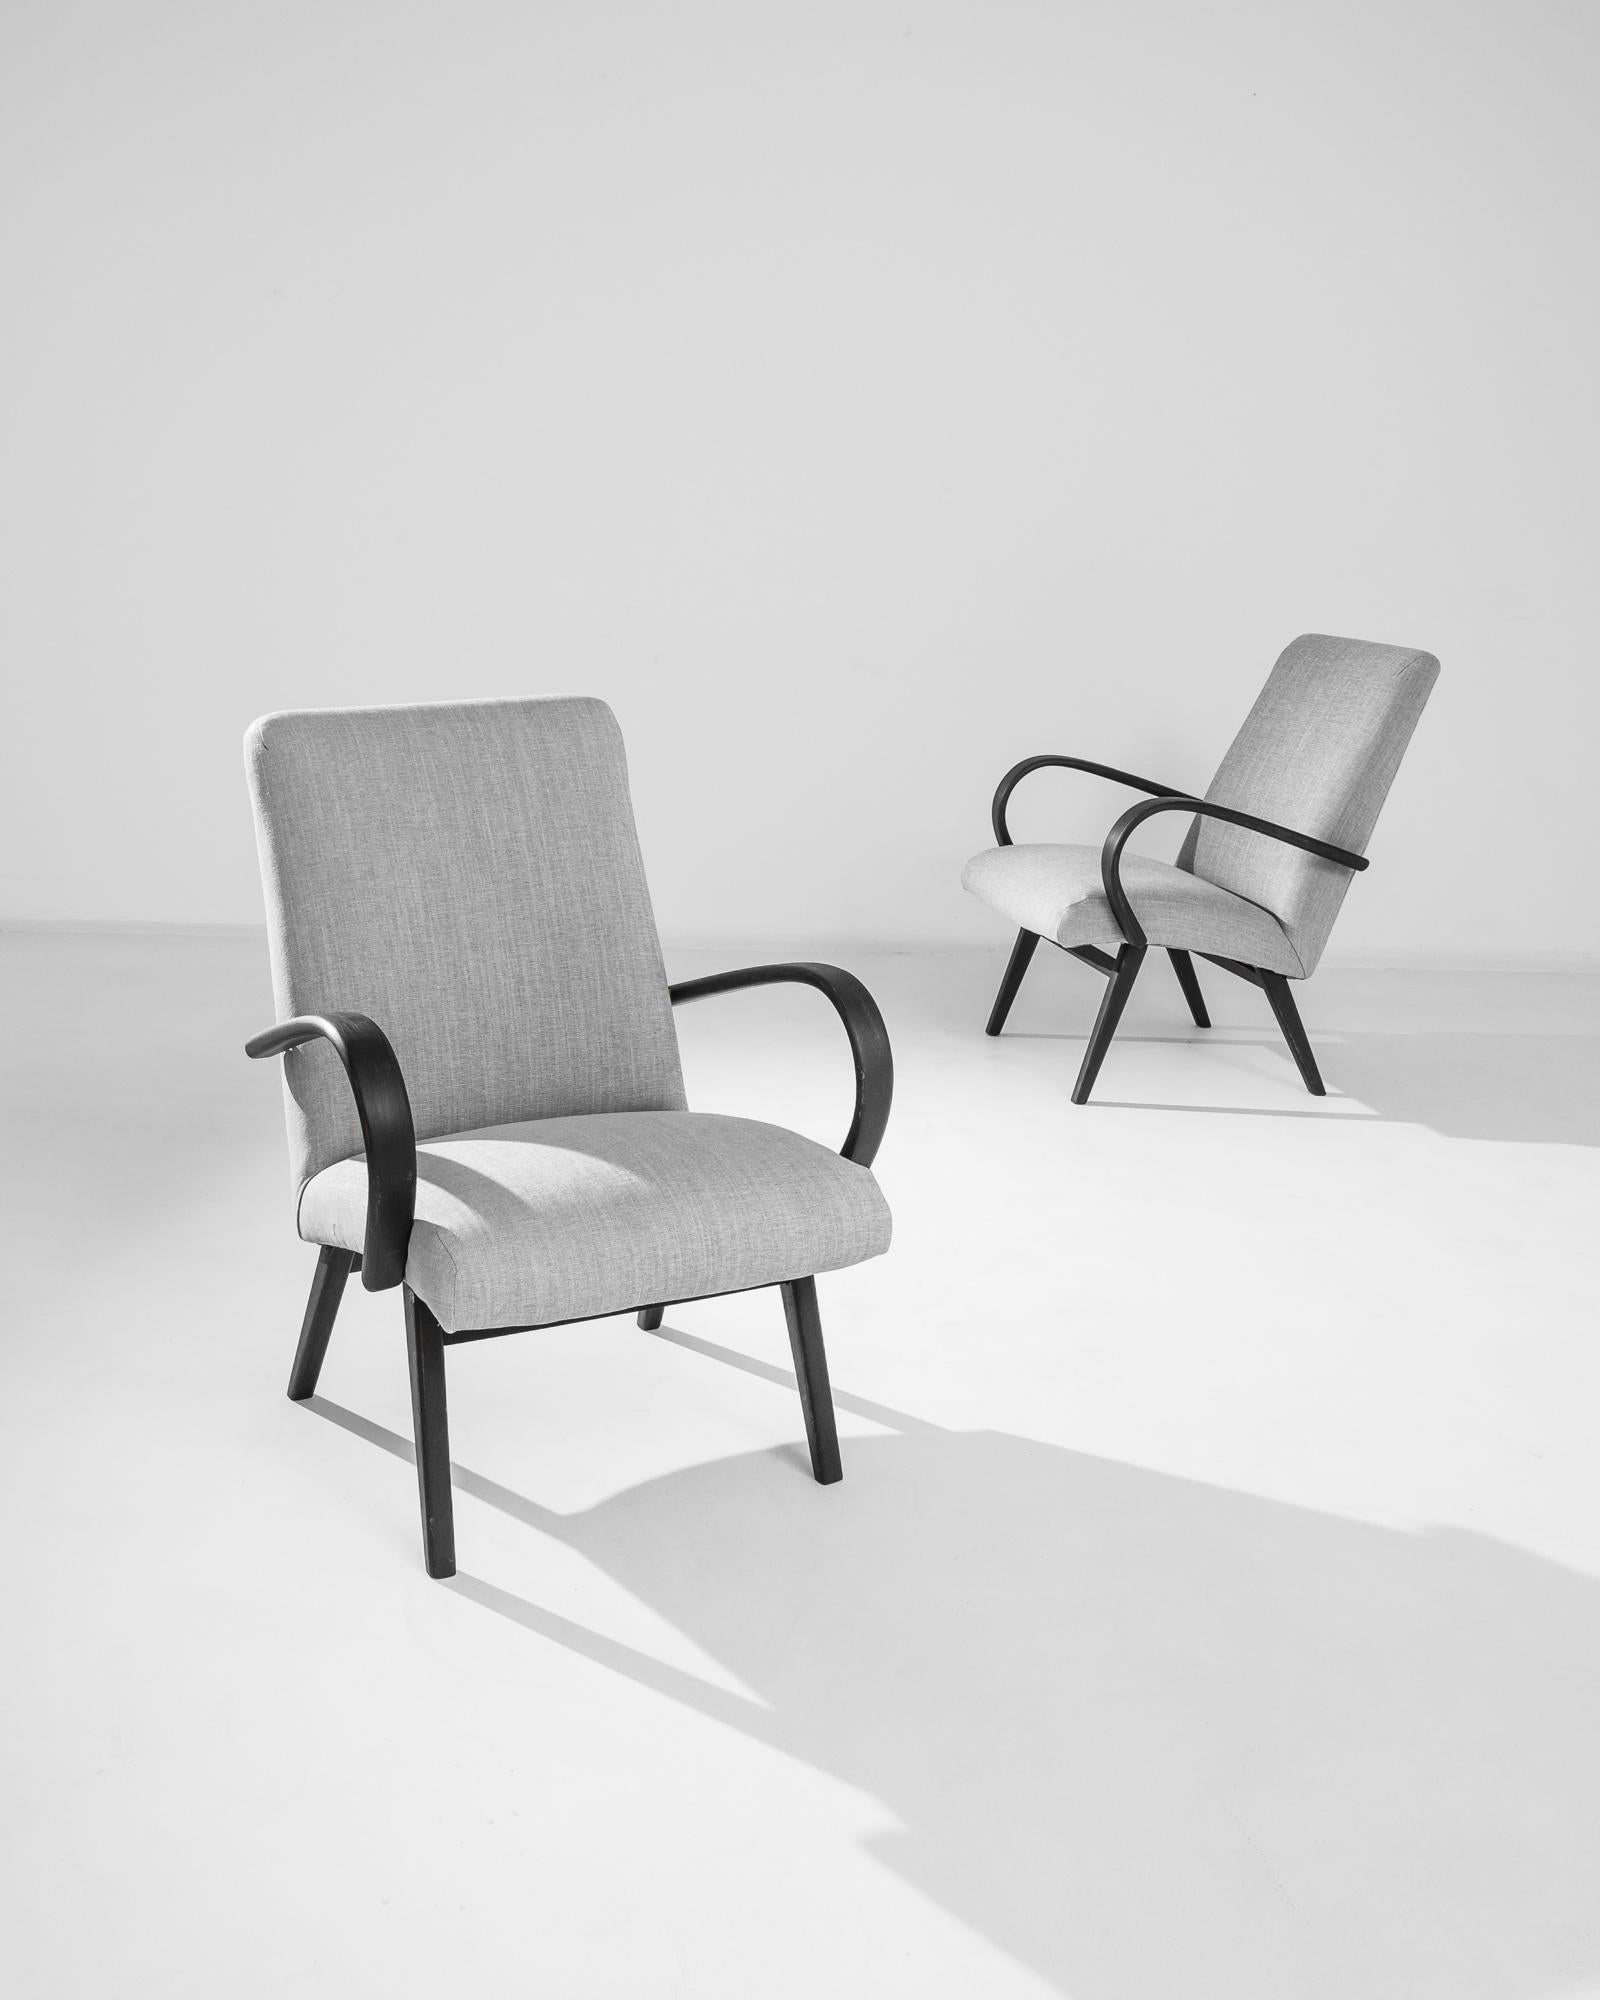 A pair of armchairs by Czech furniture designer Jindrich Halabala. This 1950s design is upholstered in an updated gray fabric, the soothing heather tone was chosen to compliment the sleek black hardwood frame. Influenced by Modern and Art Deco